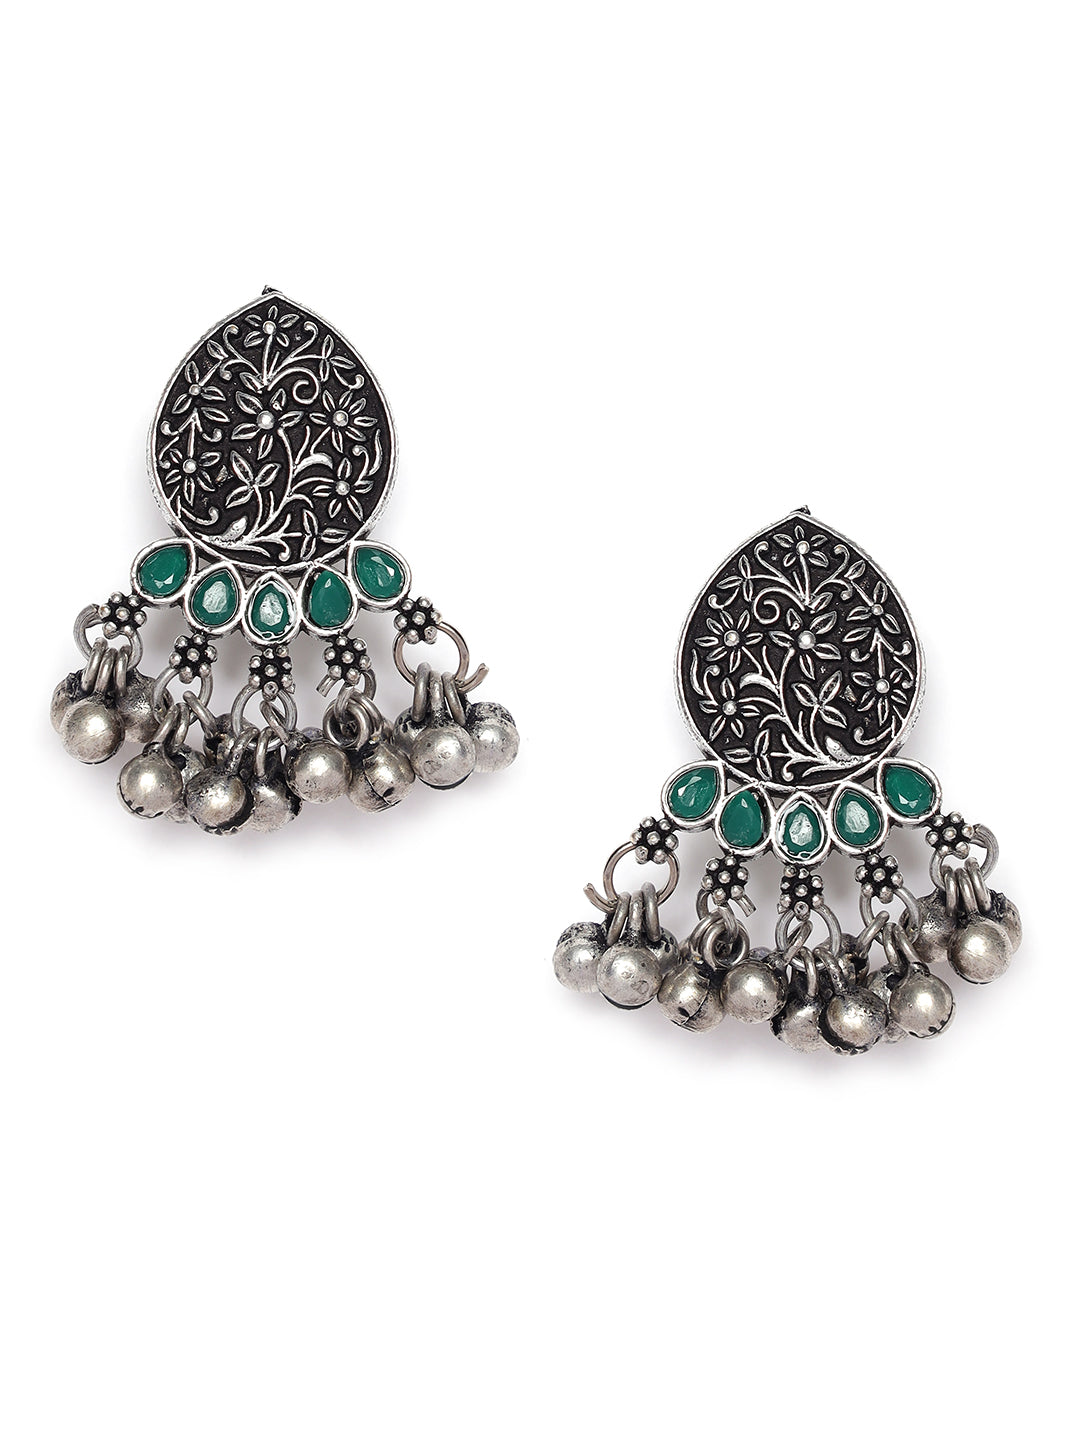 Oxidized Silver-Plated Green Stone-Studded & Beaded Handcrafted Peacock Shaped Jewelry Set - Jazzandsizzle